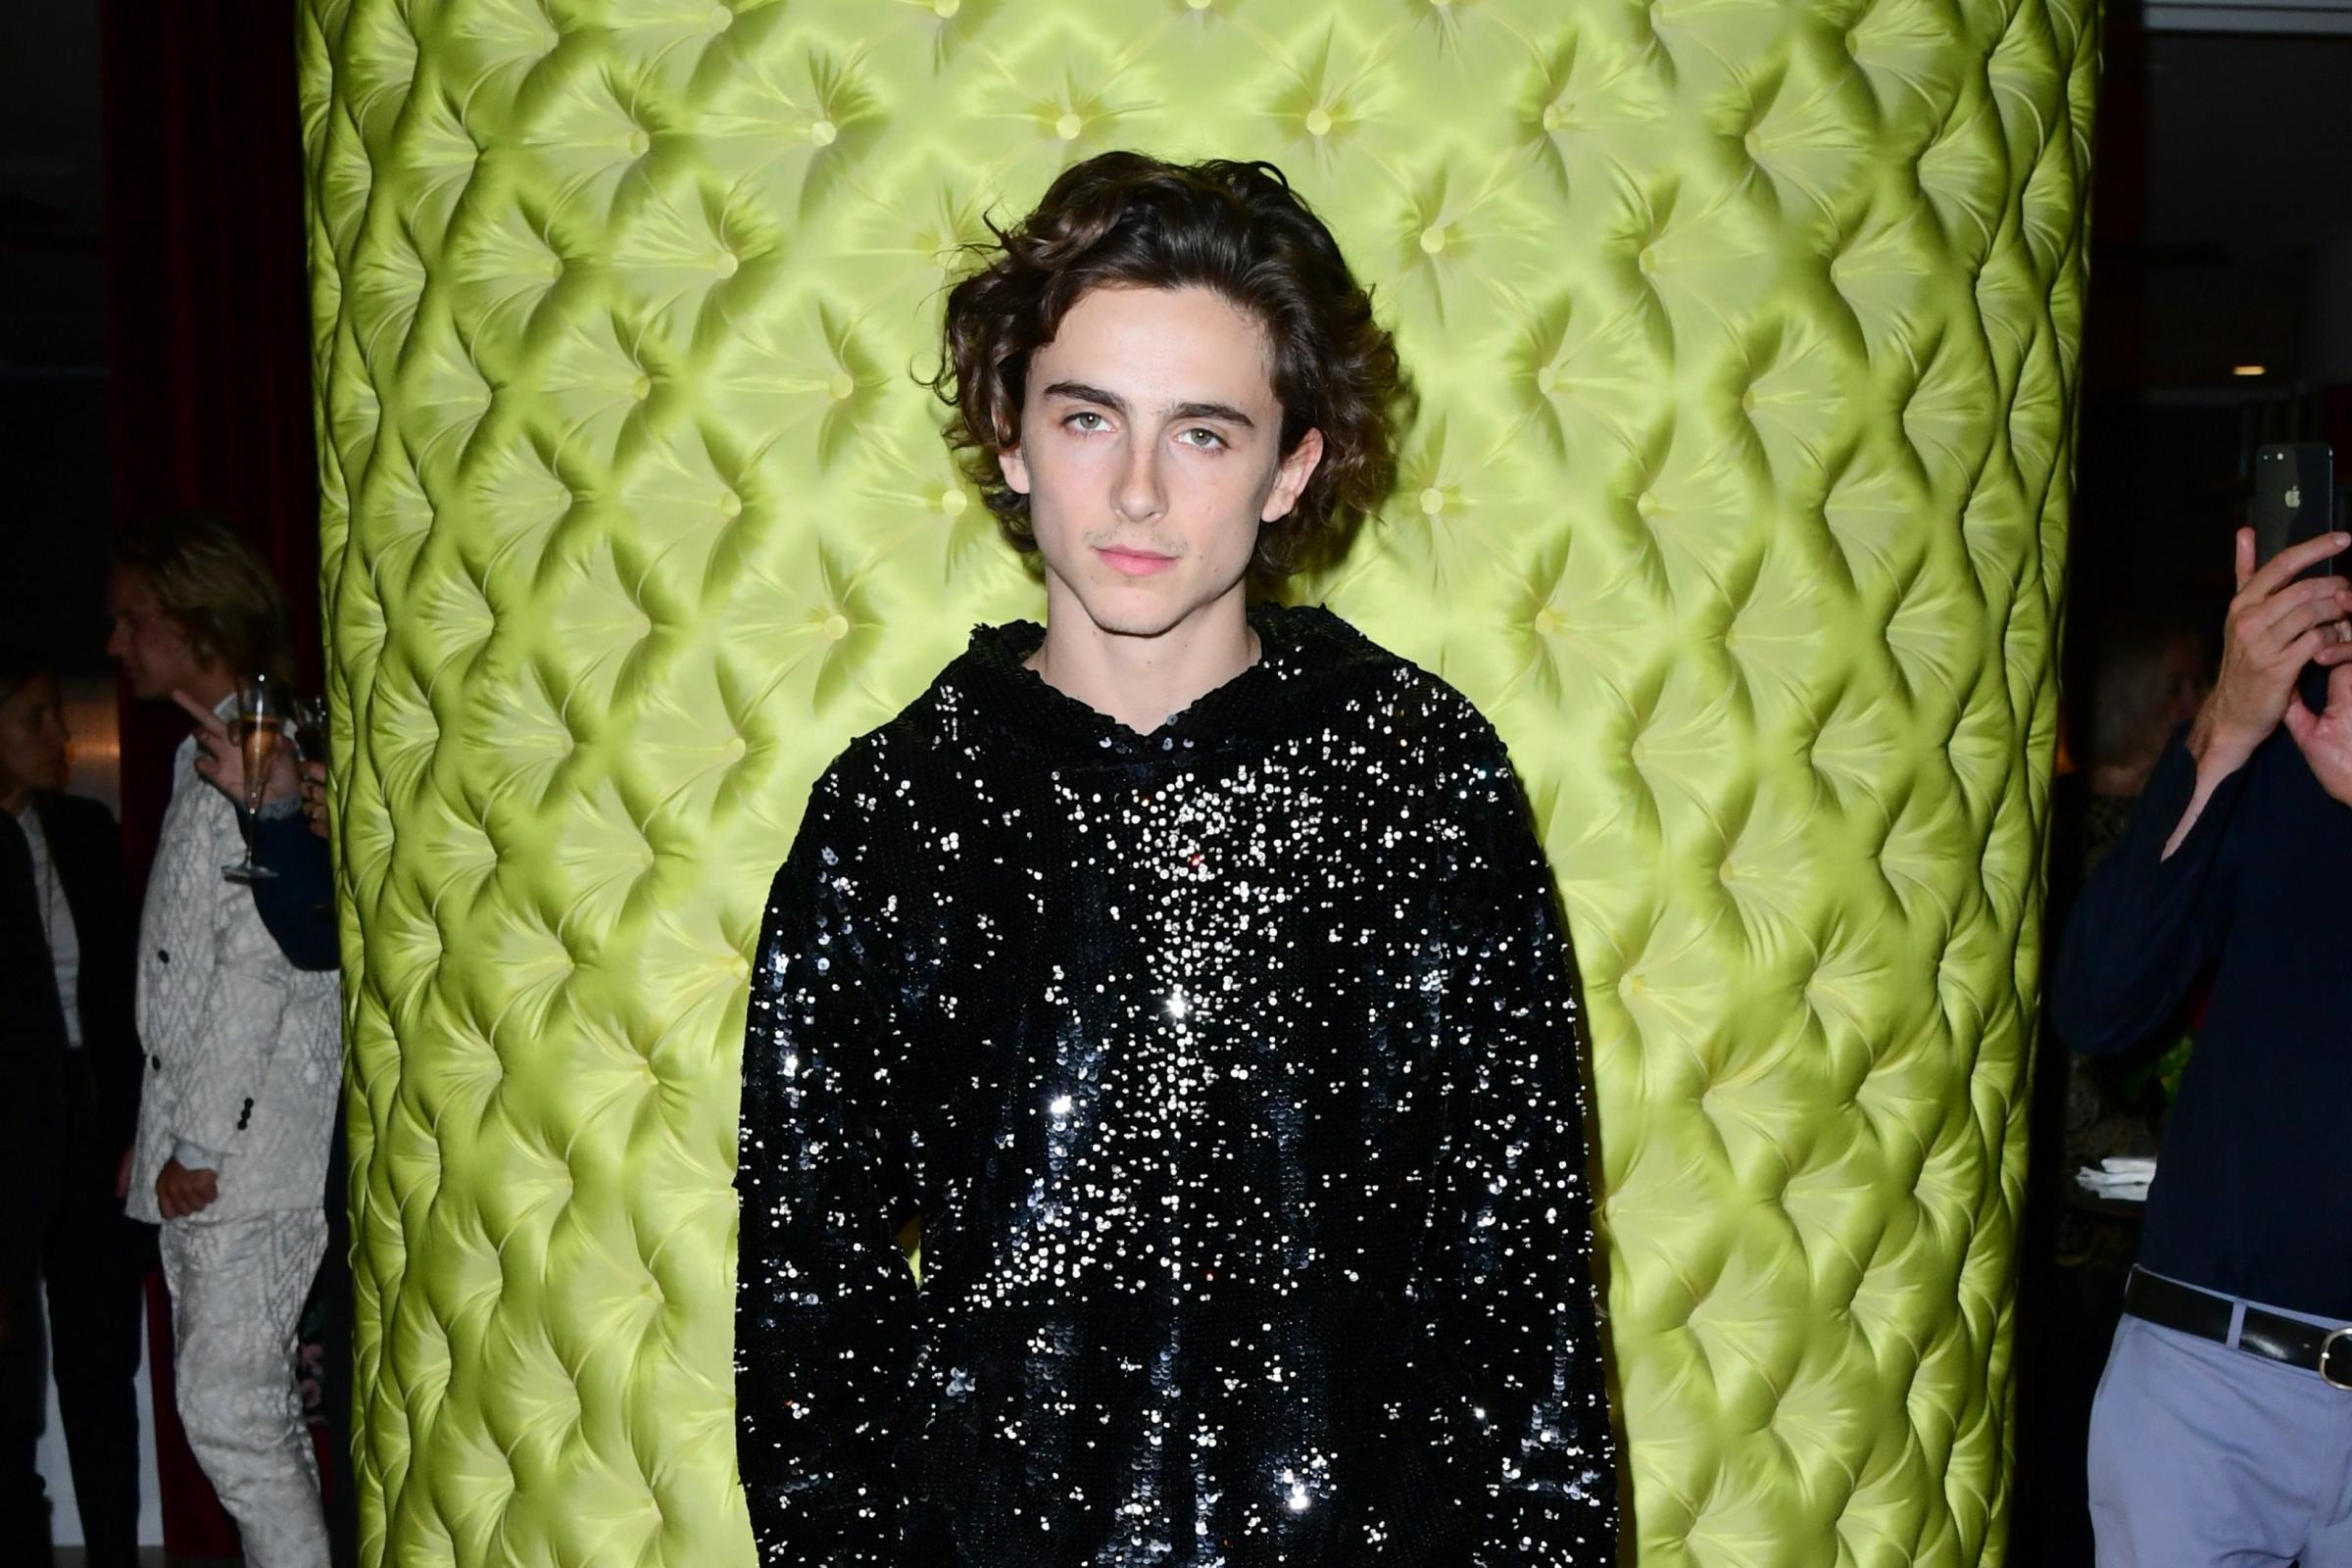 Hollywood star Timothee Chalamet to appear in Amy Herzog play at The Old Vic